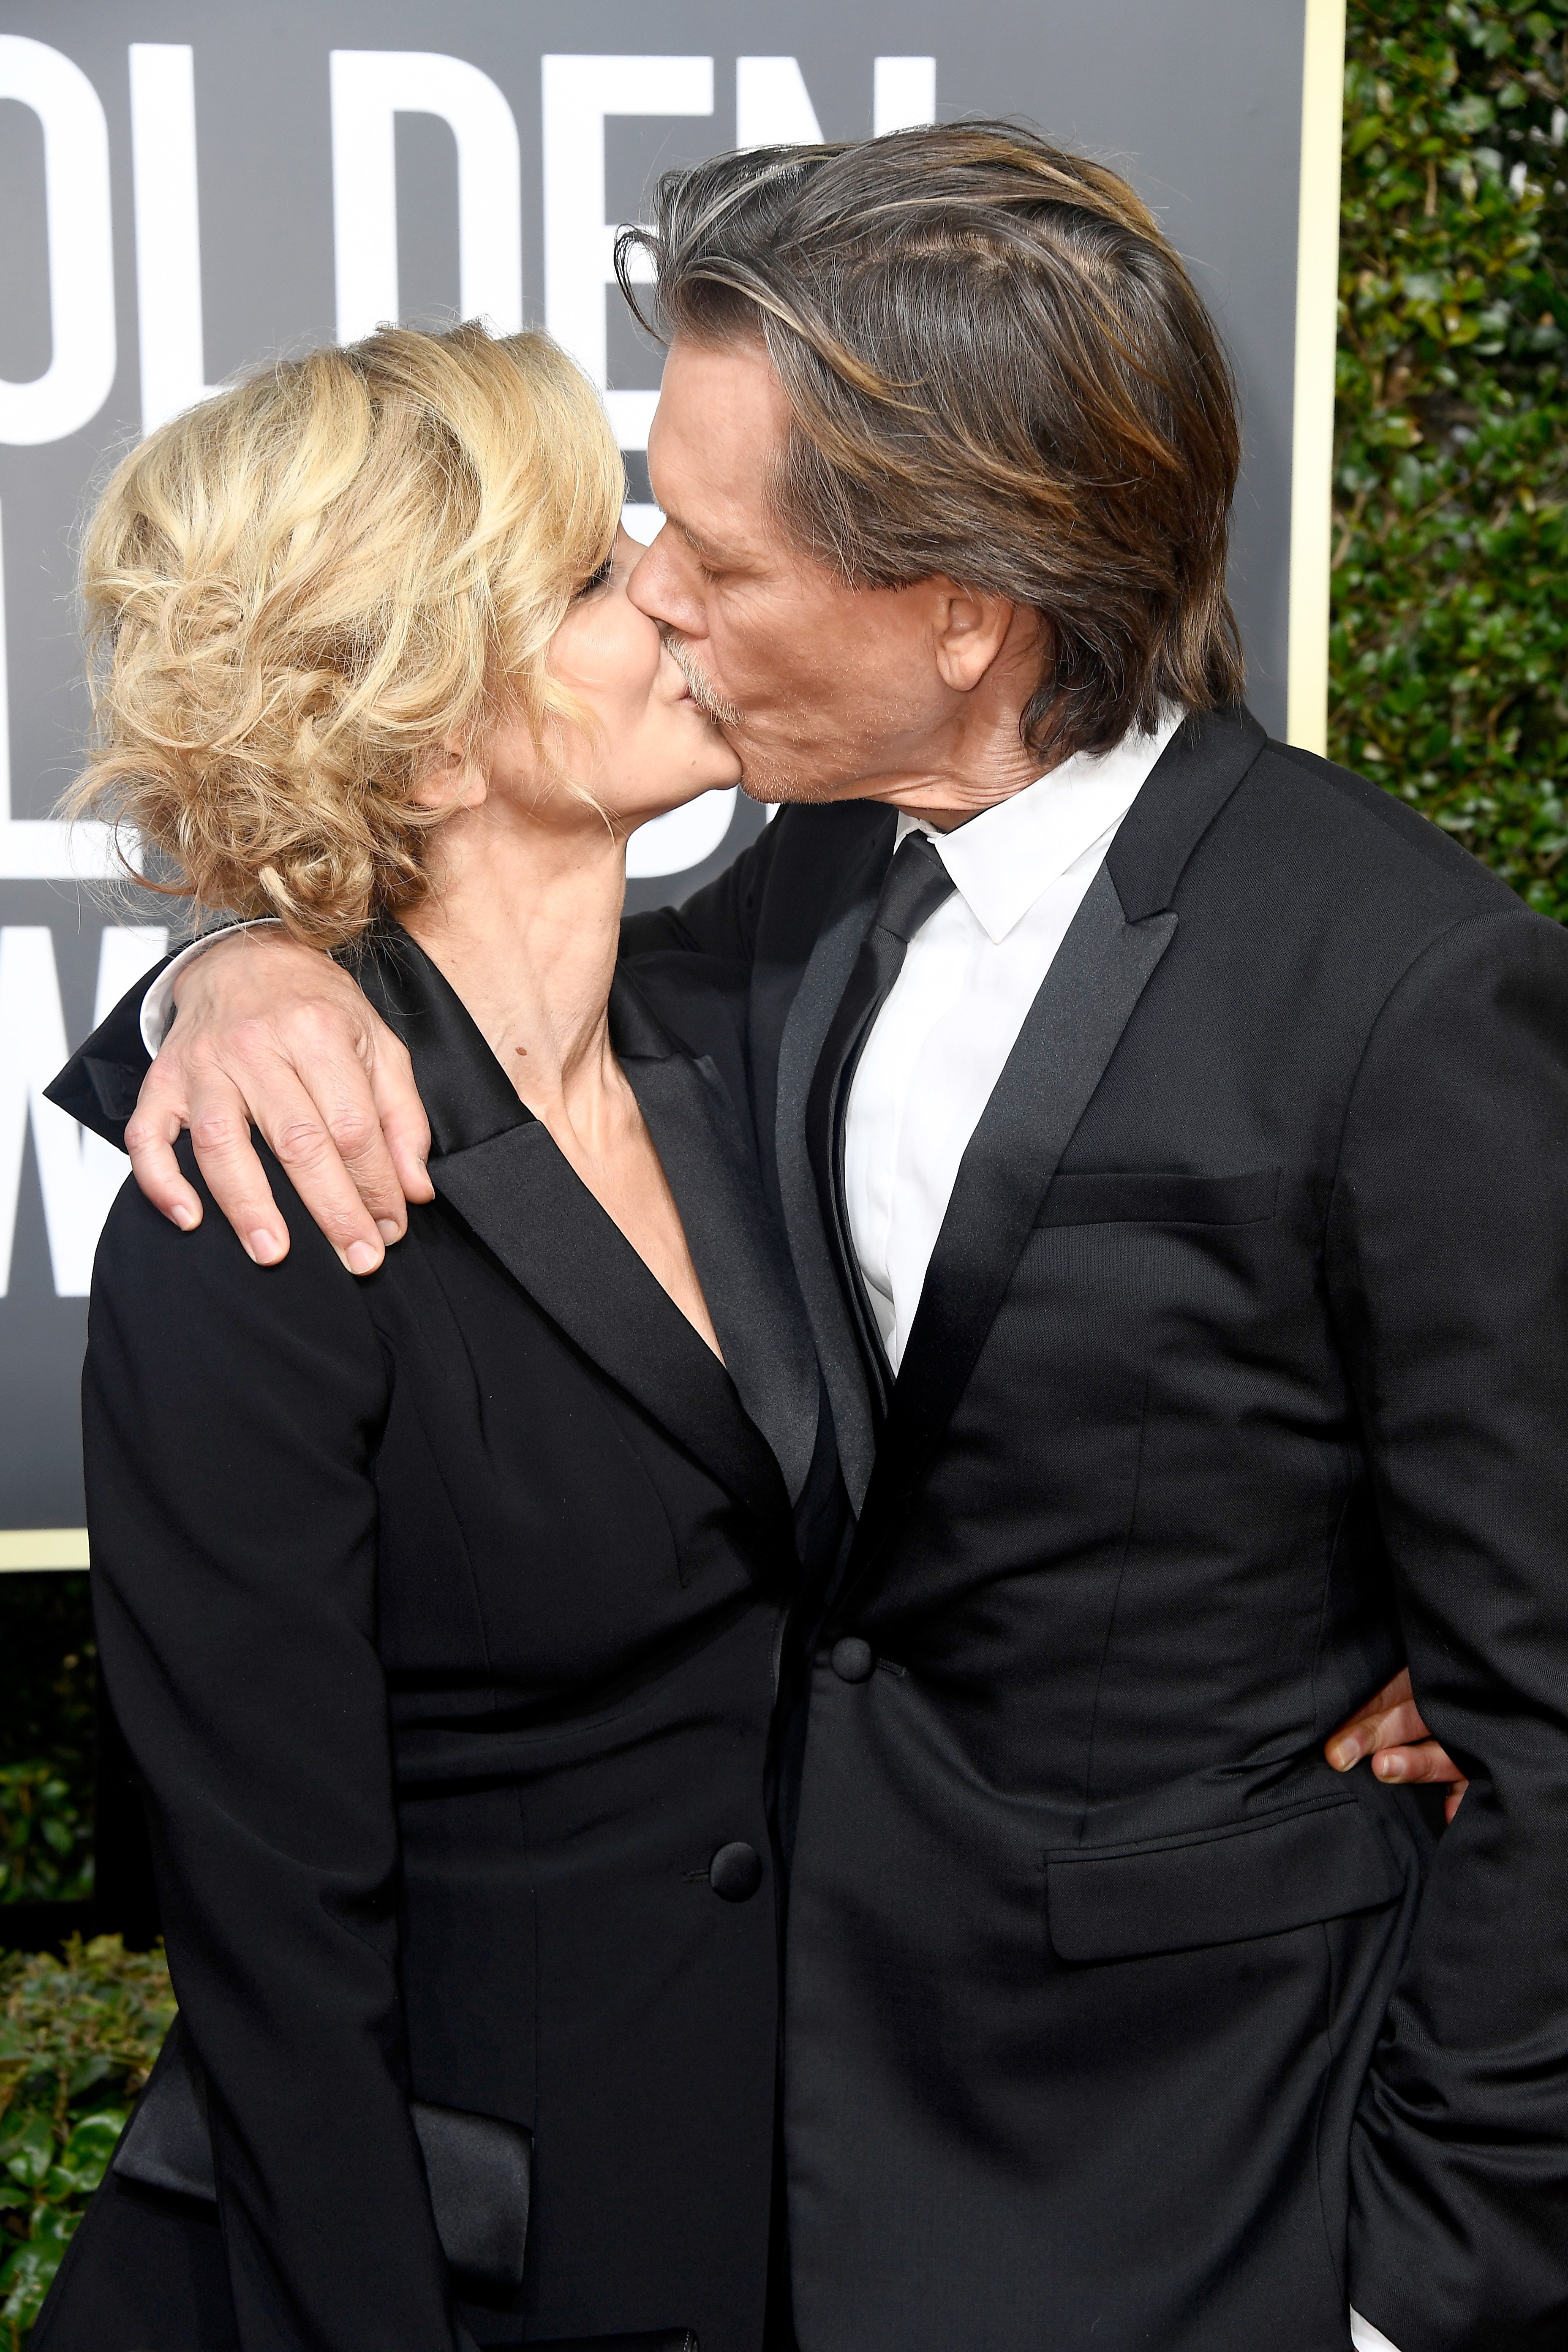 Kevin Bacon and his wife, Kyra Sedgwick attend the 75th Annual Golden Globe Awards at The Beverly Hilton Hotel on January 7, 2018. | Source: Getty Images